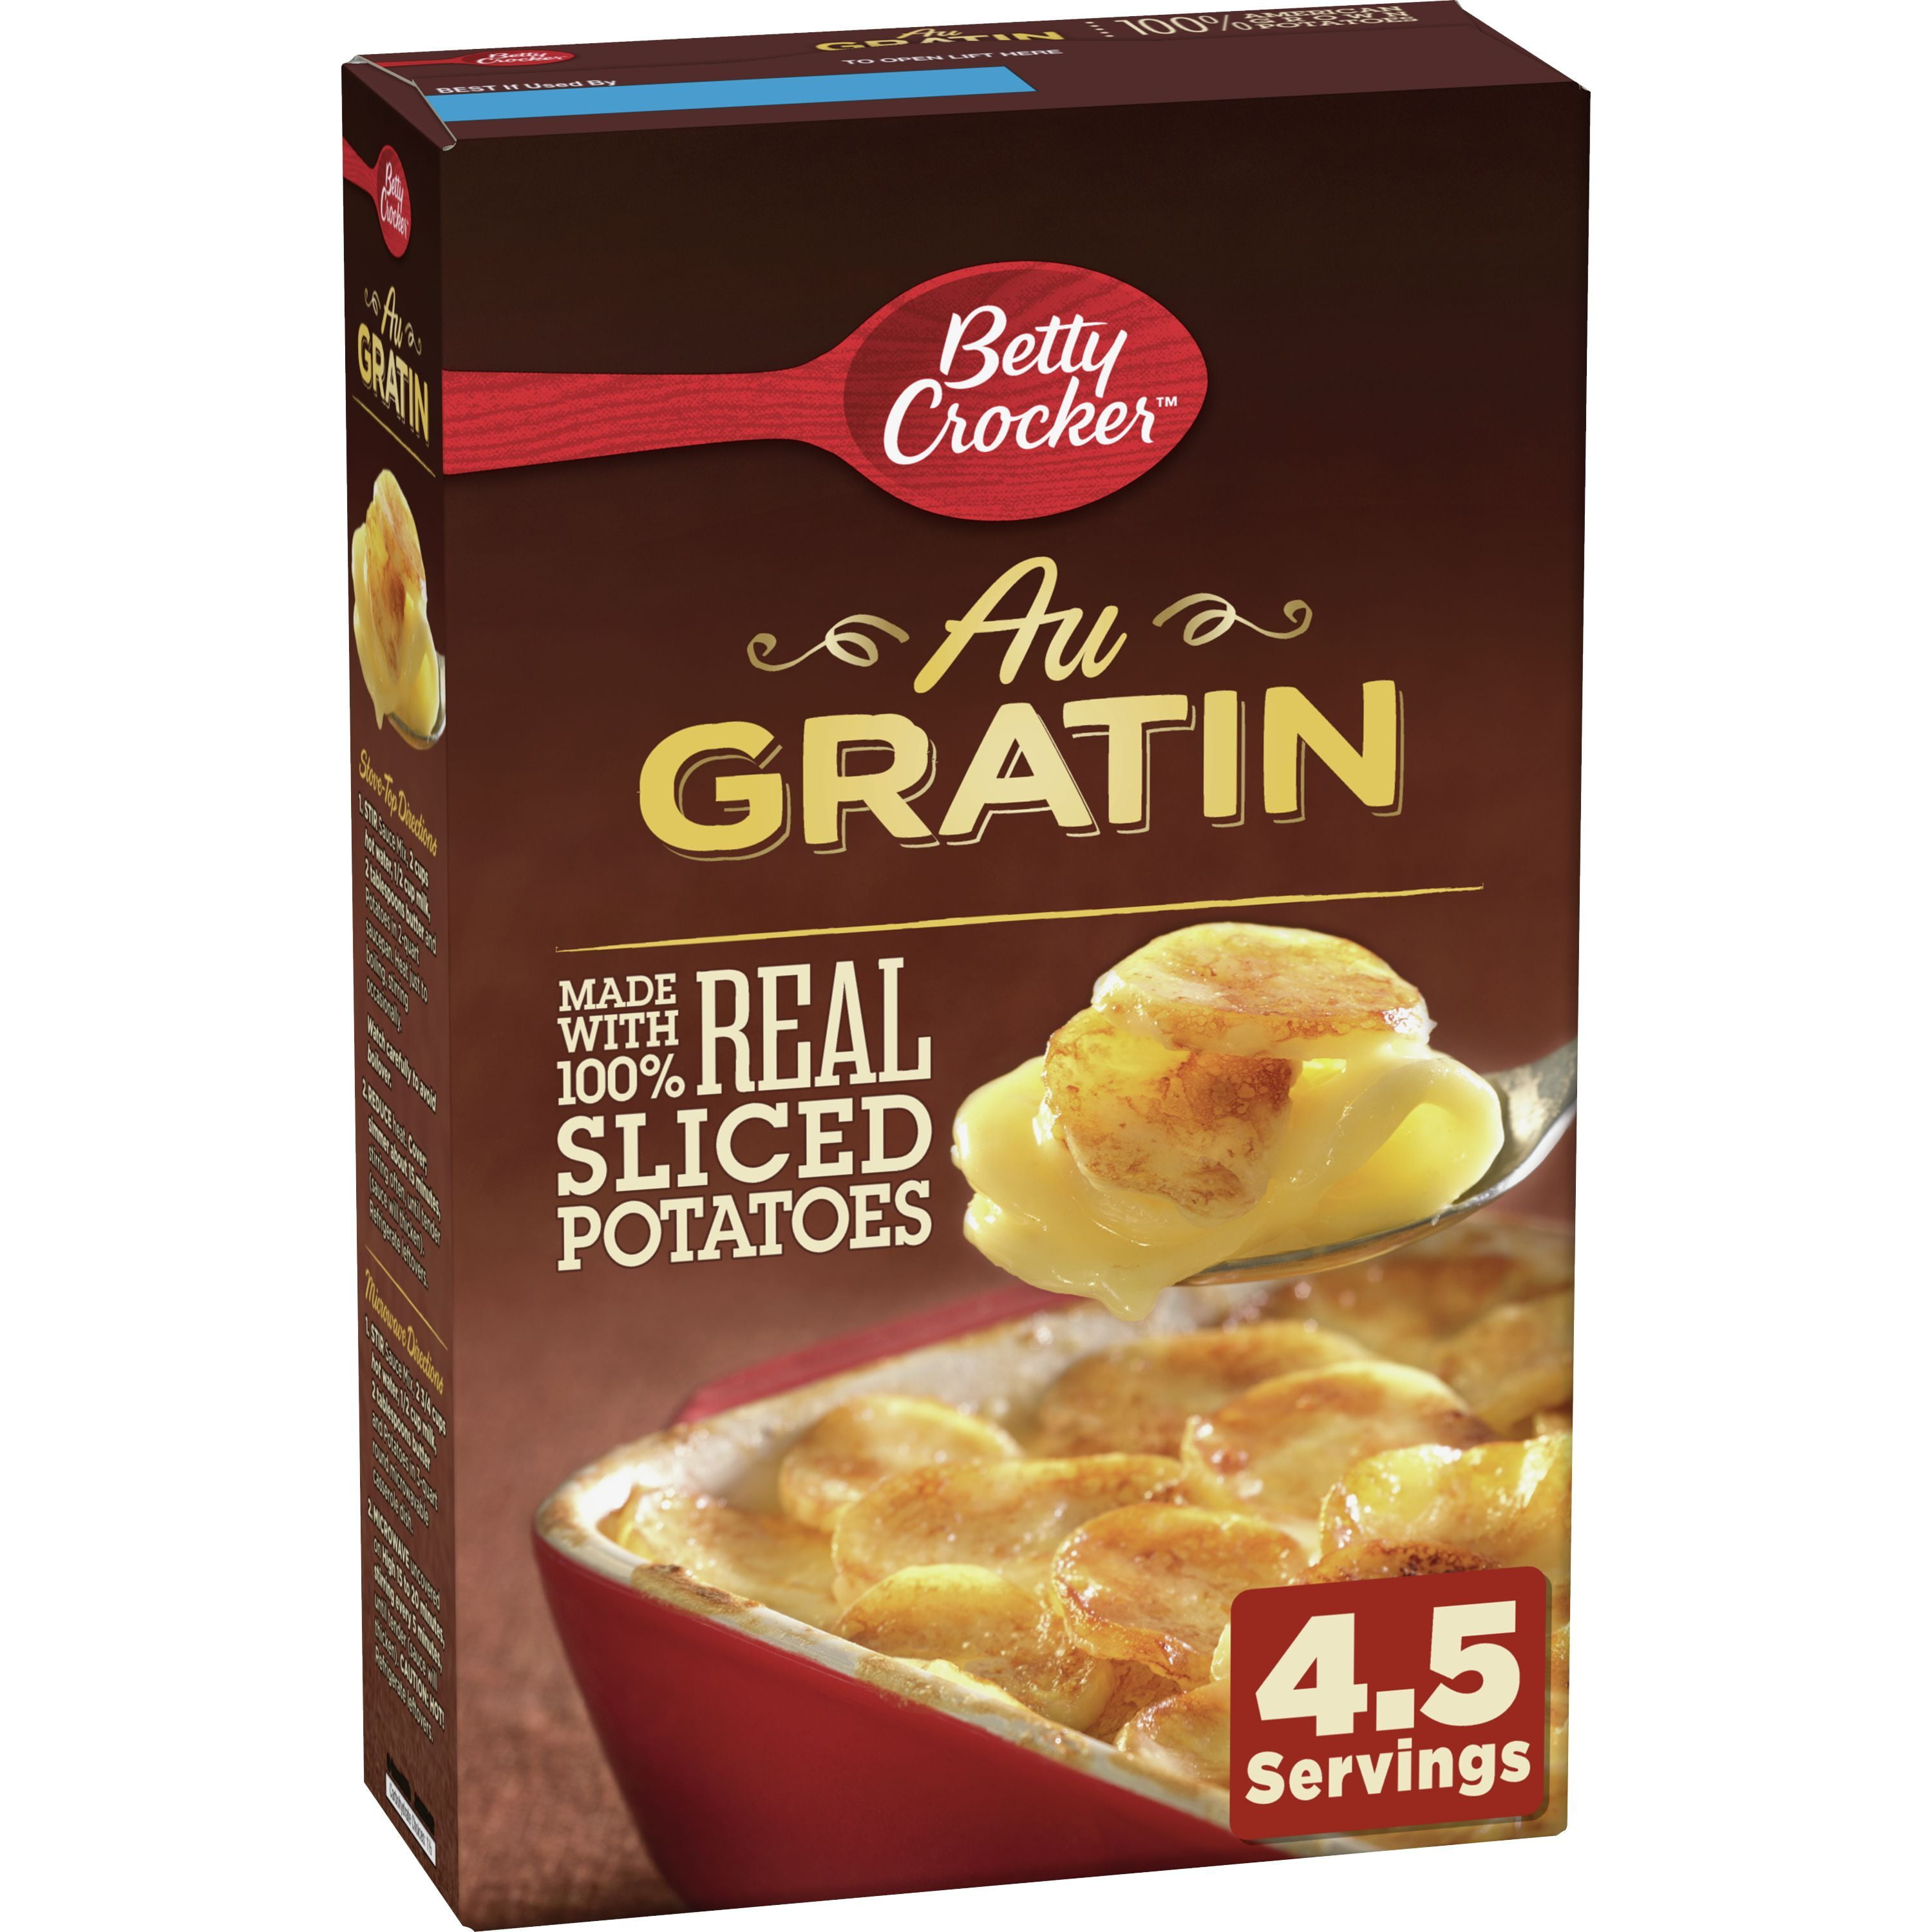 Betty Crocker Au Gratin Potatoes, Made with Real Cheese, 4.7 oz